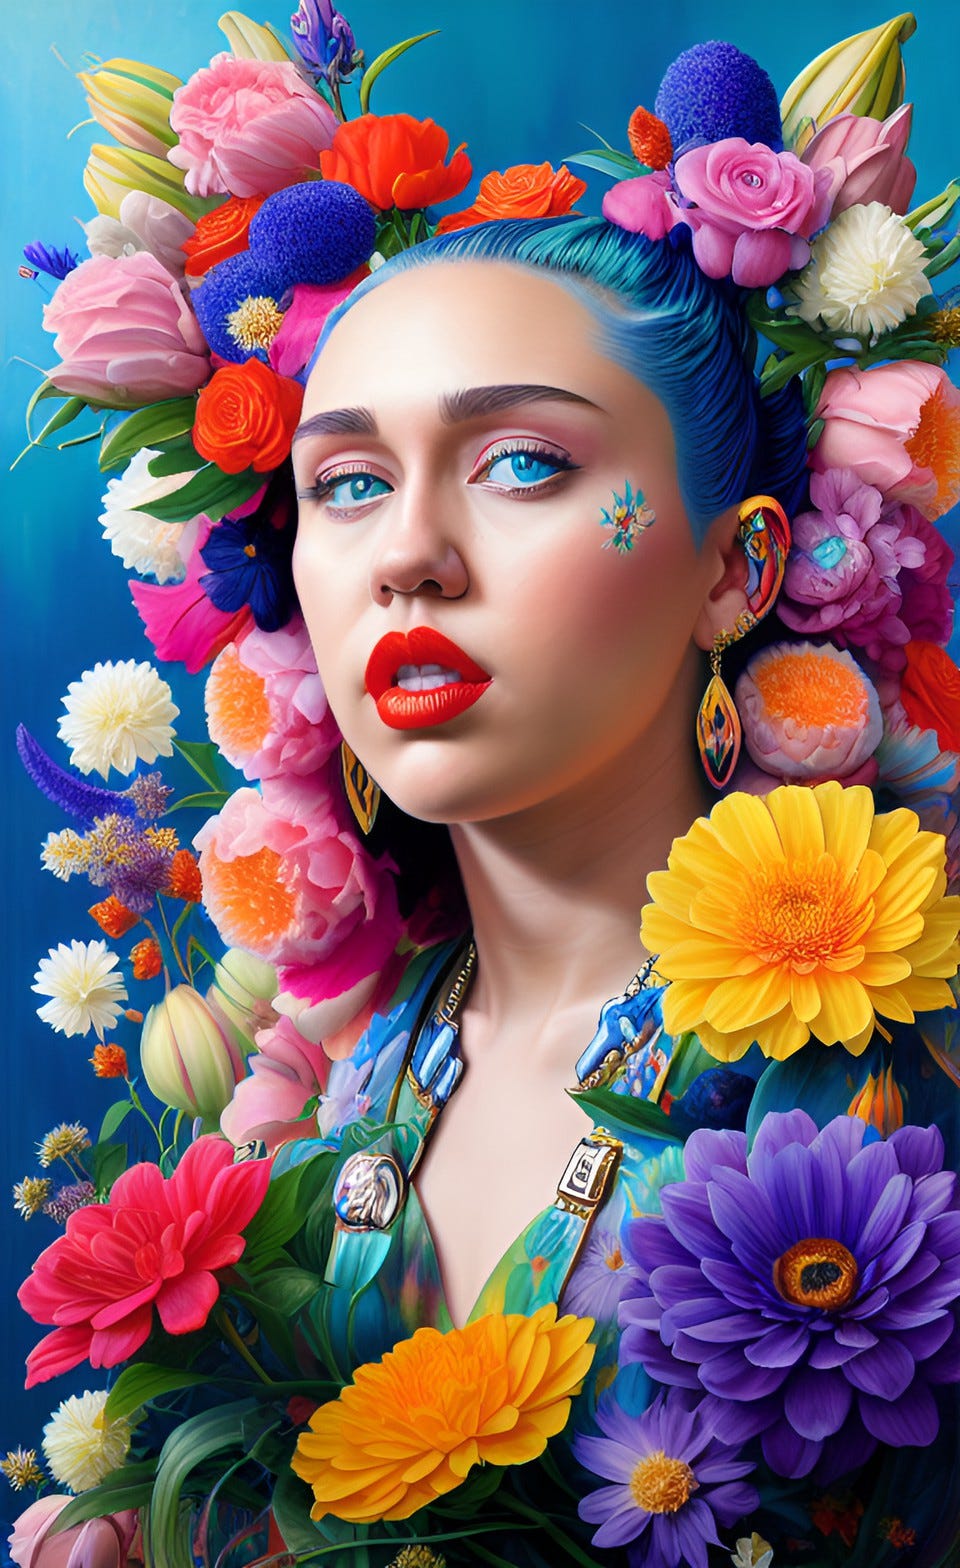 Miley Cyrus' 'Flowers' and 'Endless Summer Vacation' Are Peak Miley